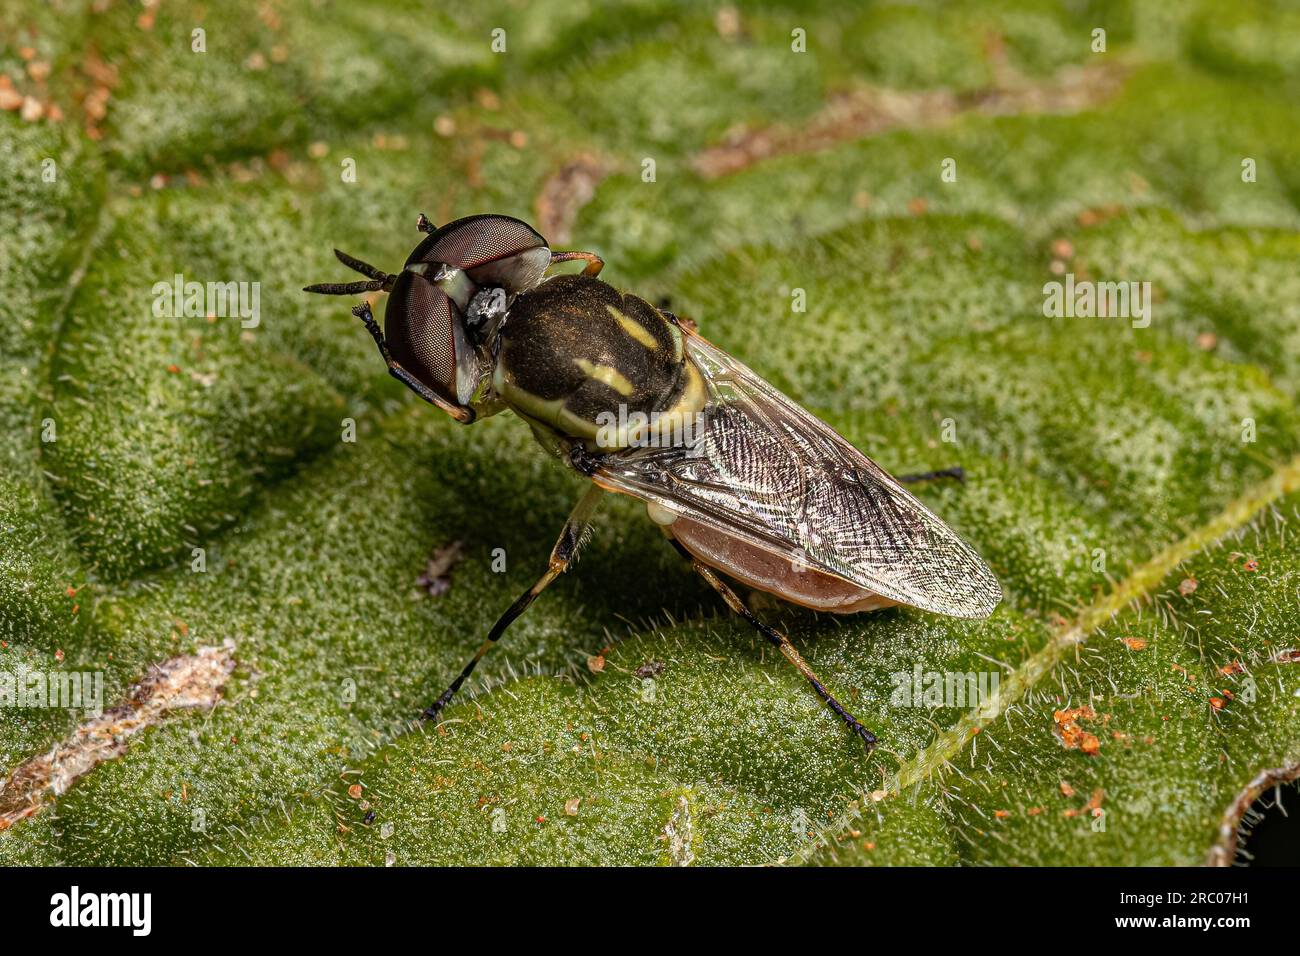 Small Adult Soldier Fly of the Tribe Stratiomyini Stock Photo